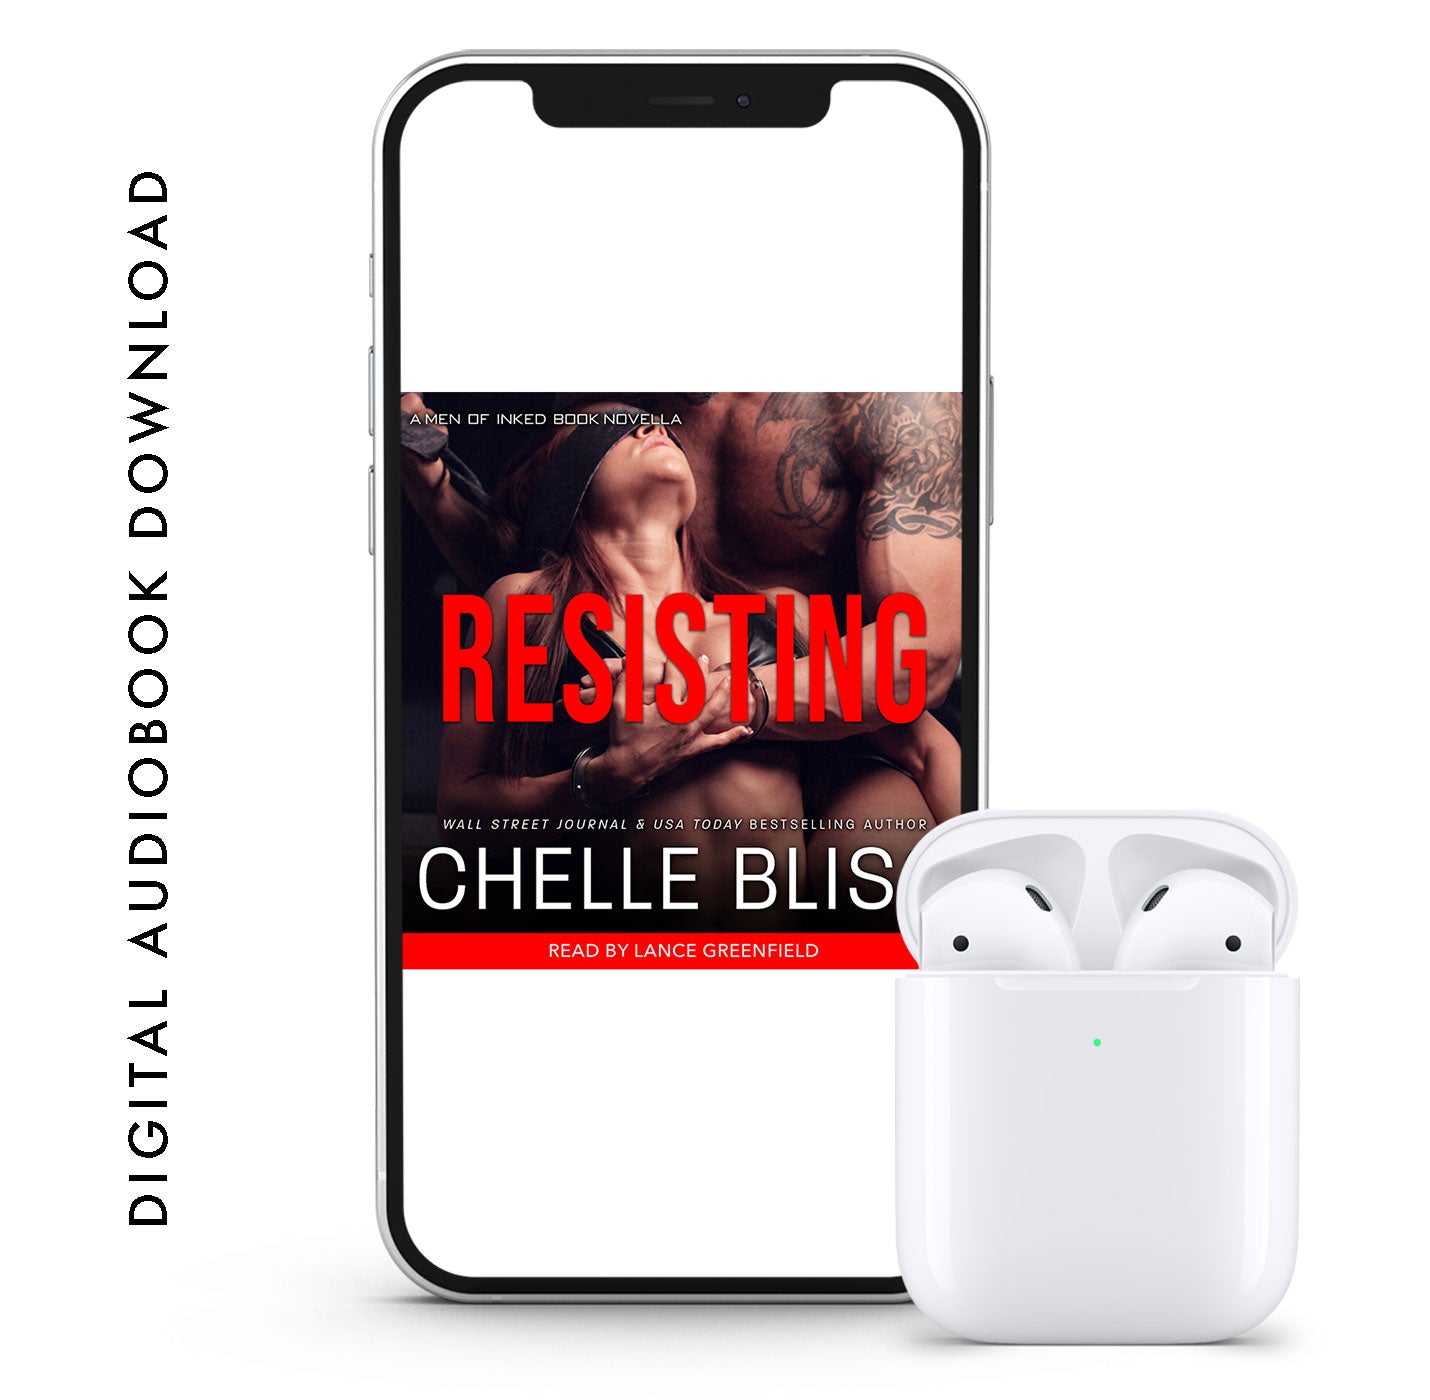 resisting audiobook by chelle bliss couple embracing 